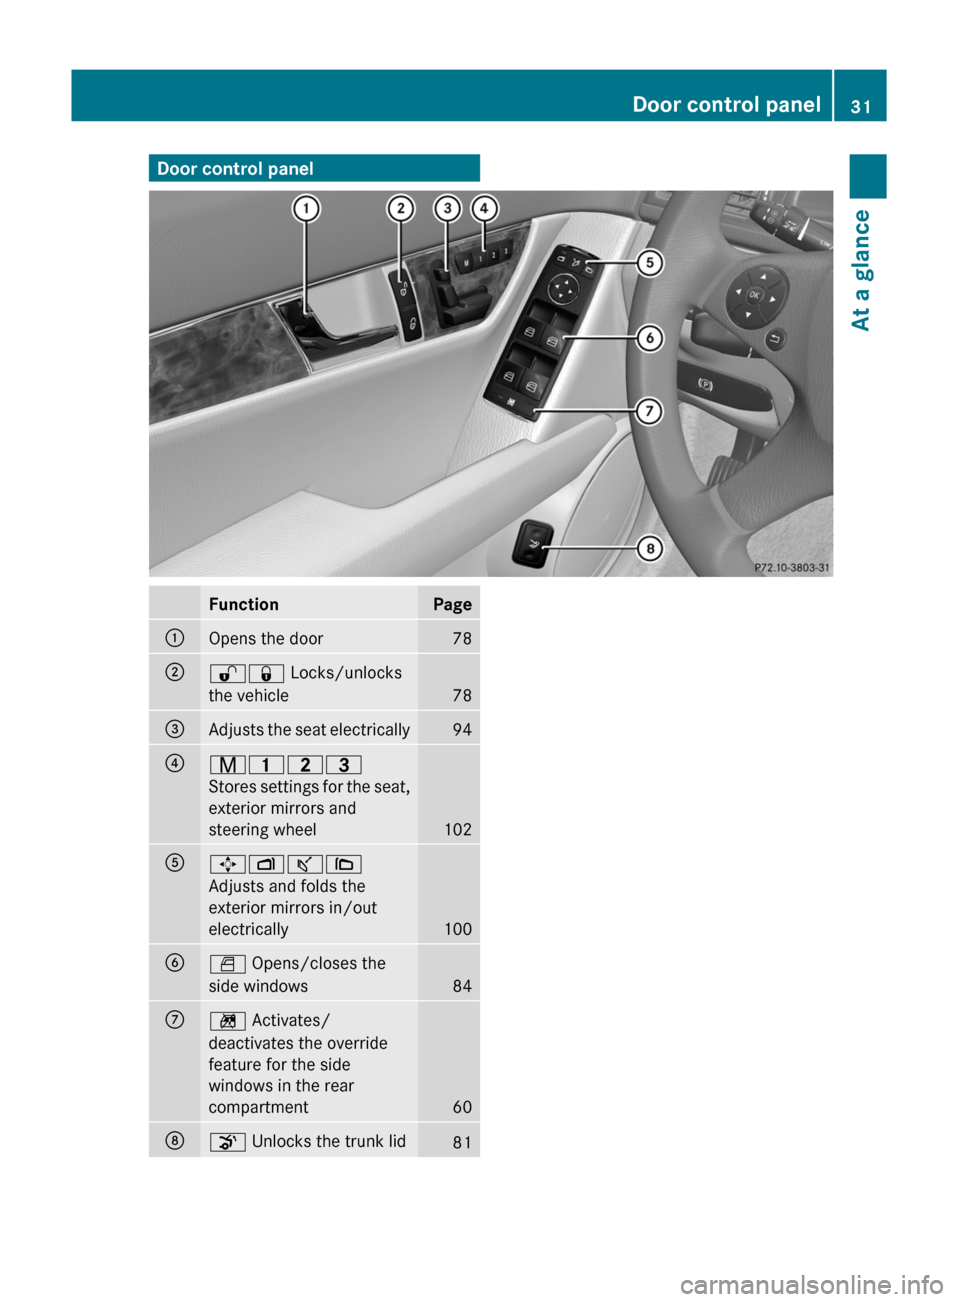 MERCEDES-BENZ C-Class 2011 W204 Owners Manual Door control panelFunctionPage:Opens the door78;%& Locks/unlocks
the vehicle
78
=Adjusts the seat electrically94?r 45=
Stores settings for the seat,
exterior mirrors and
steering wheel
102
A7 Zª\
Adj